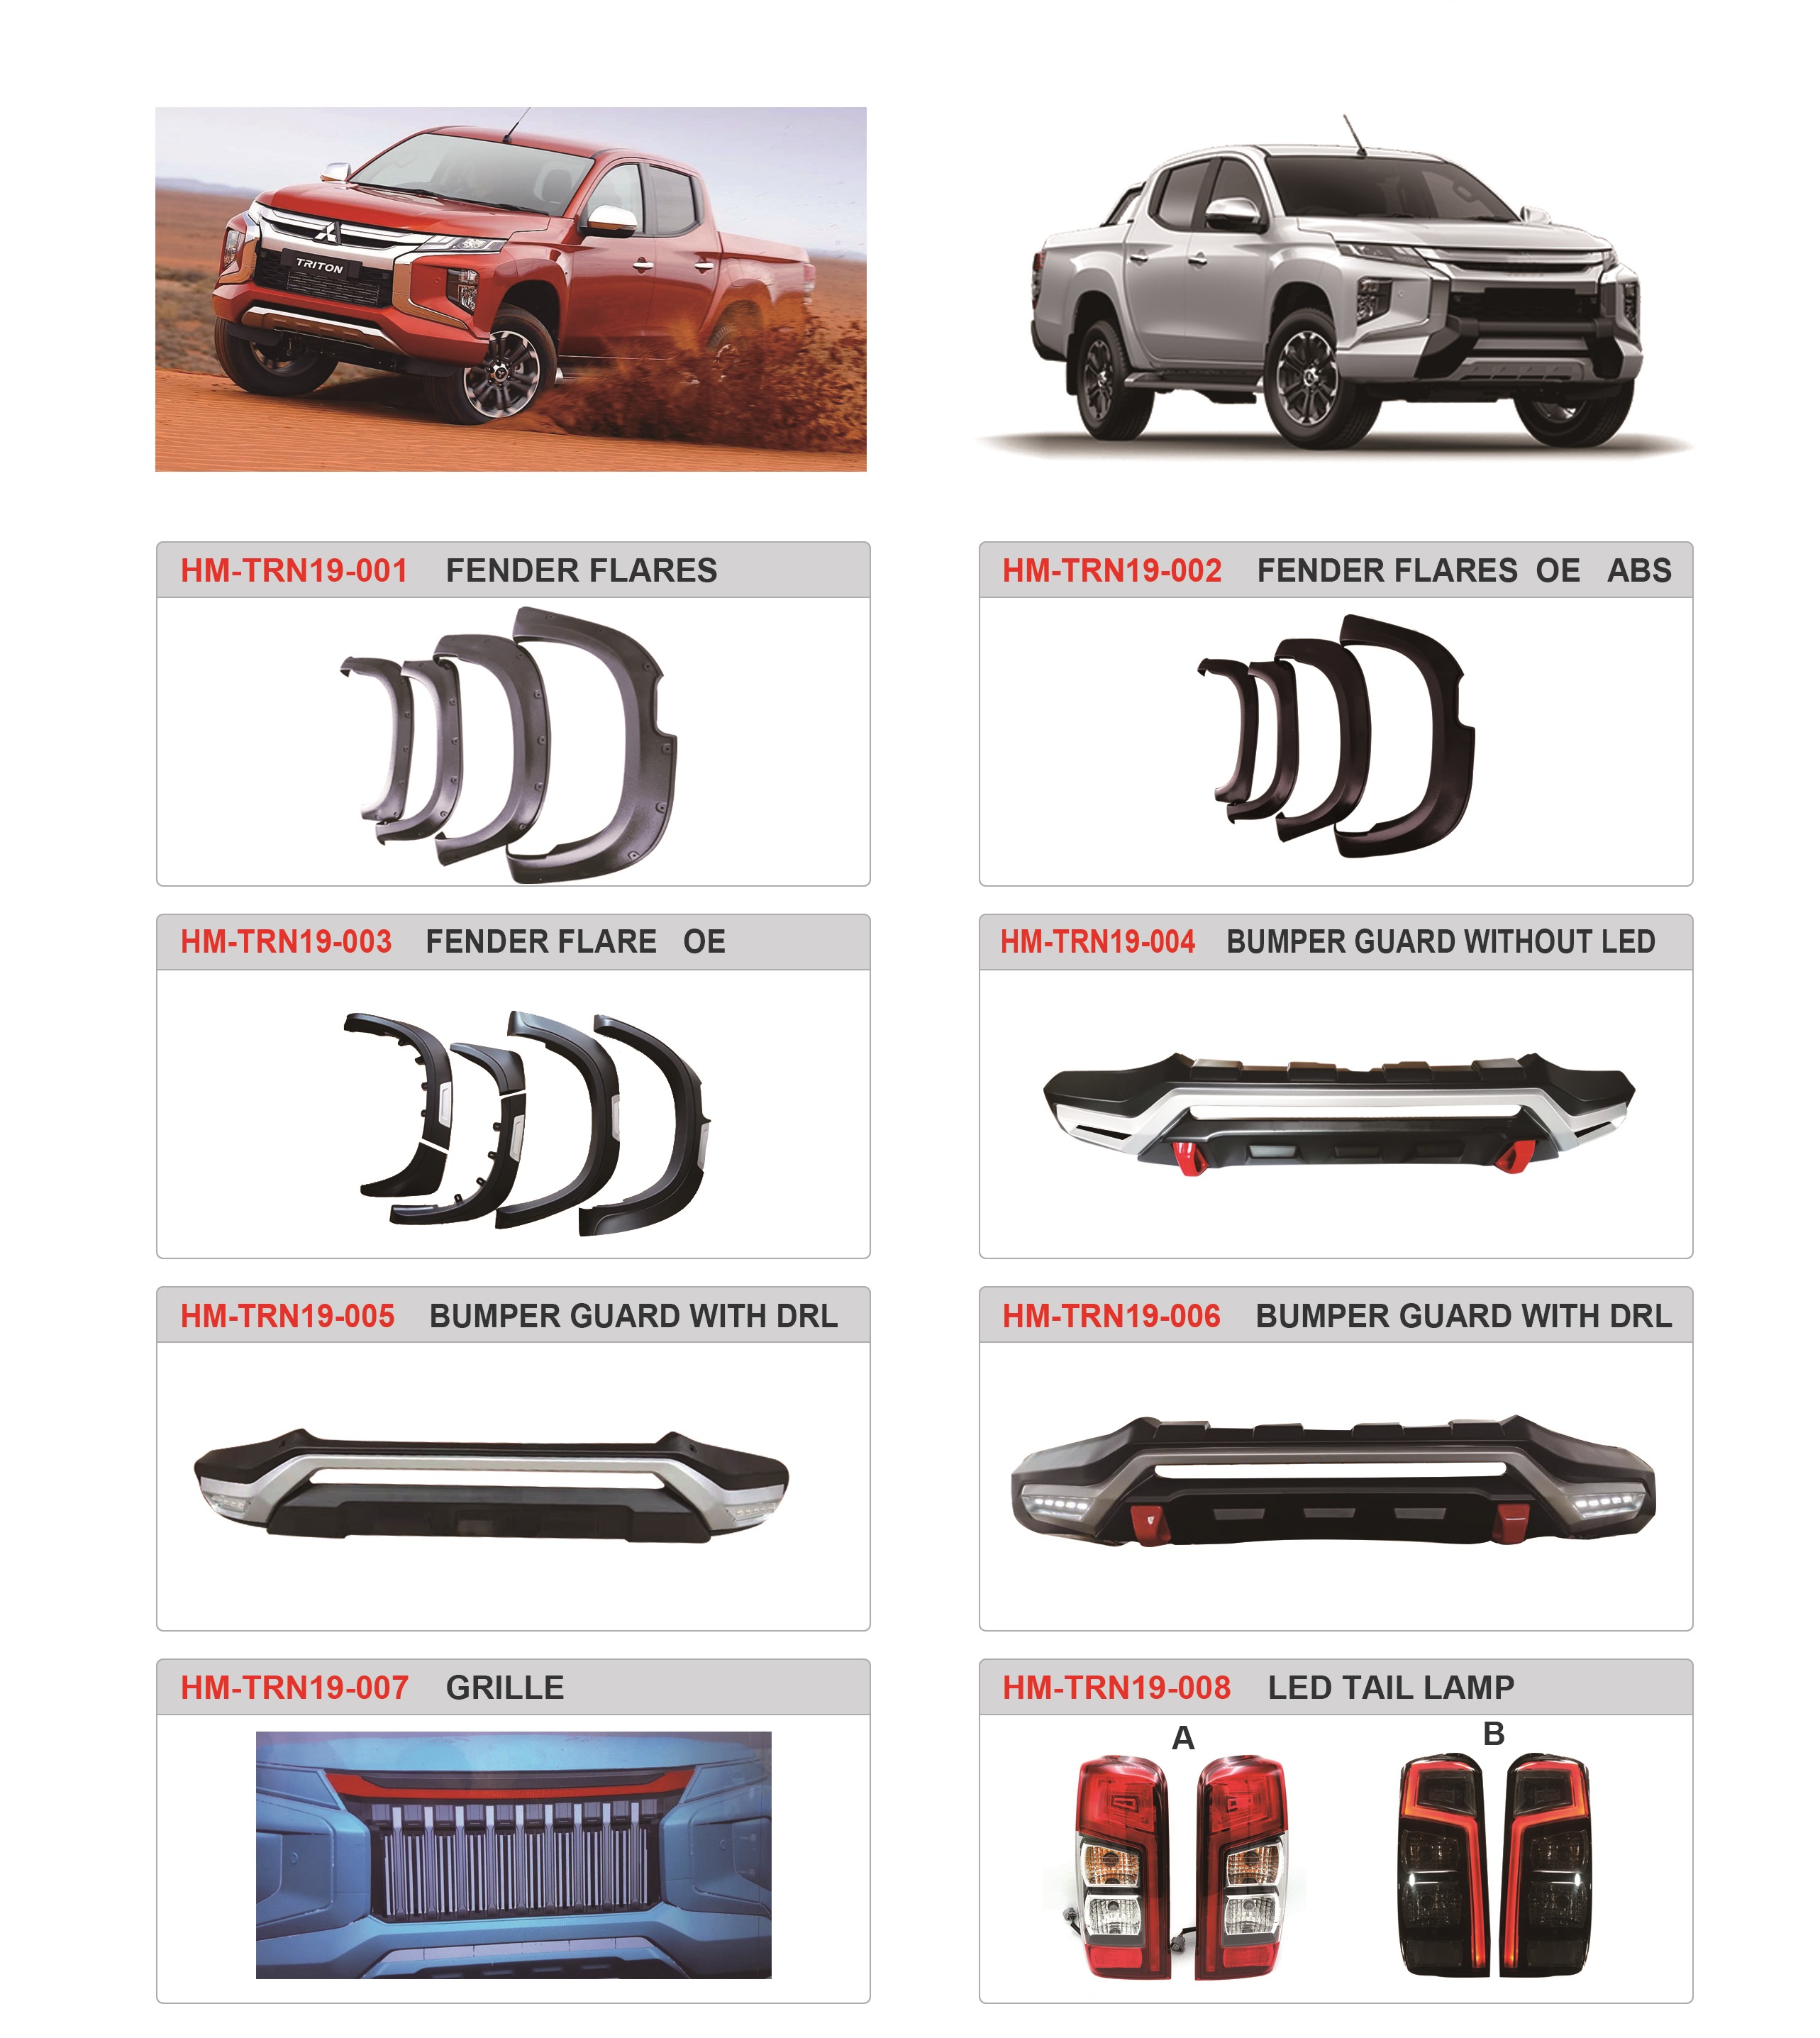 FOR 2019 TRITON L200 FENDER FLARES Featured Image